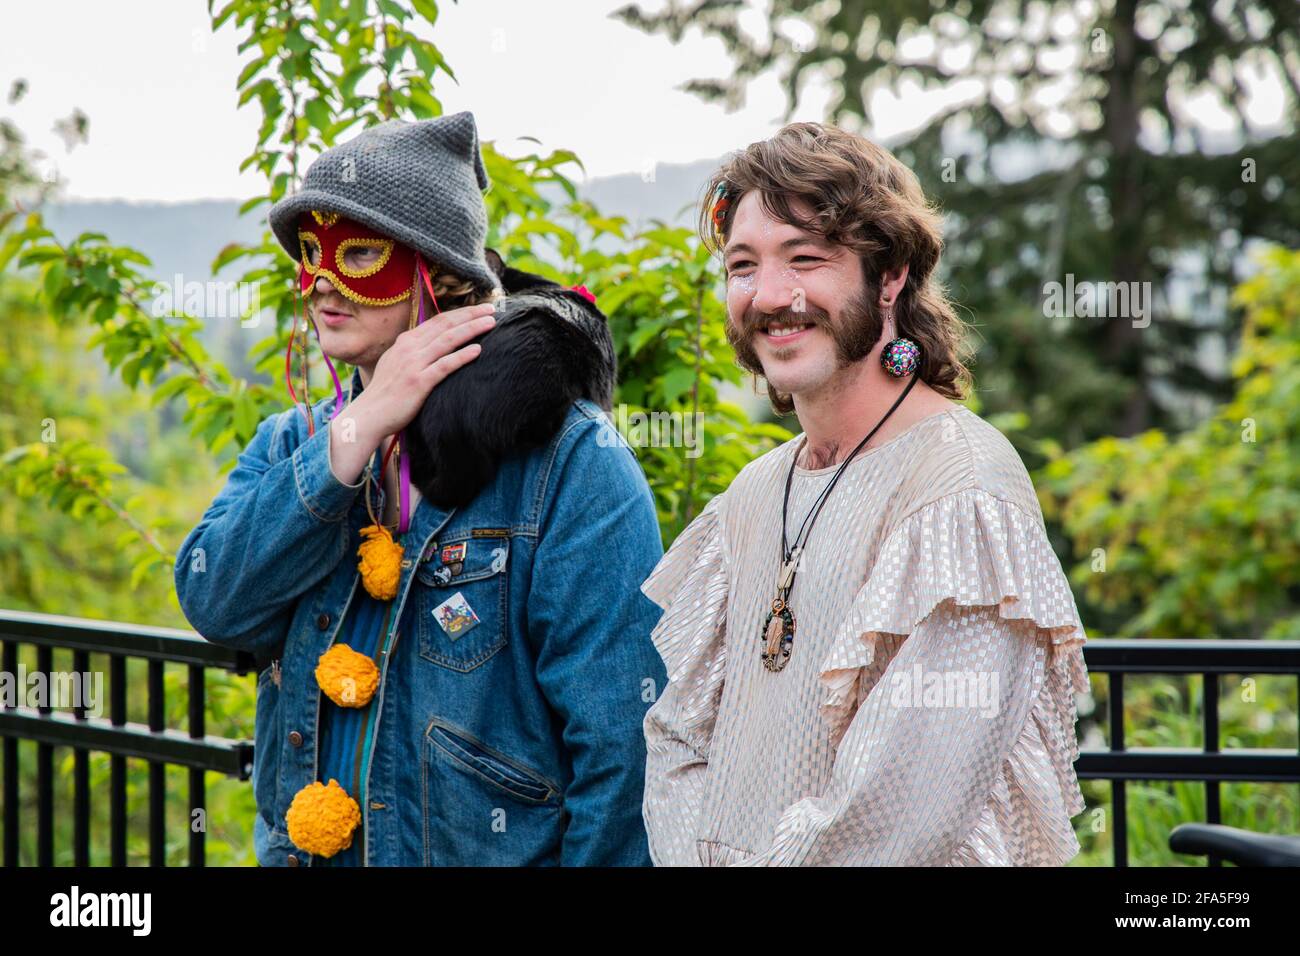 Portland, USA. 22nd Apr, 2021. Musicians attend an Earth Day celebration organized by the Sunrise Movement, a youth-led environmental activism group, on April 22, 2021 in Mt. Tabor Park, Portland, Oregon. (Photo by Gaspard Le Dem/Sipa USA) Credit: Sipa USA/Alamy Live News Stock Photo